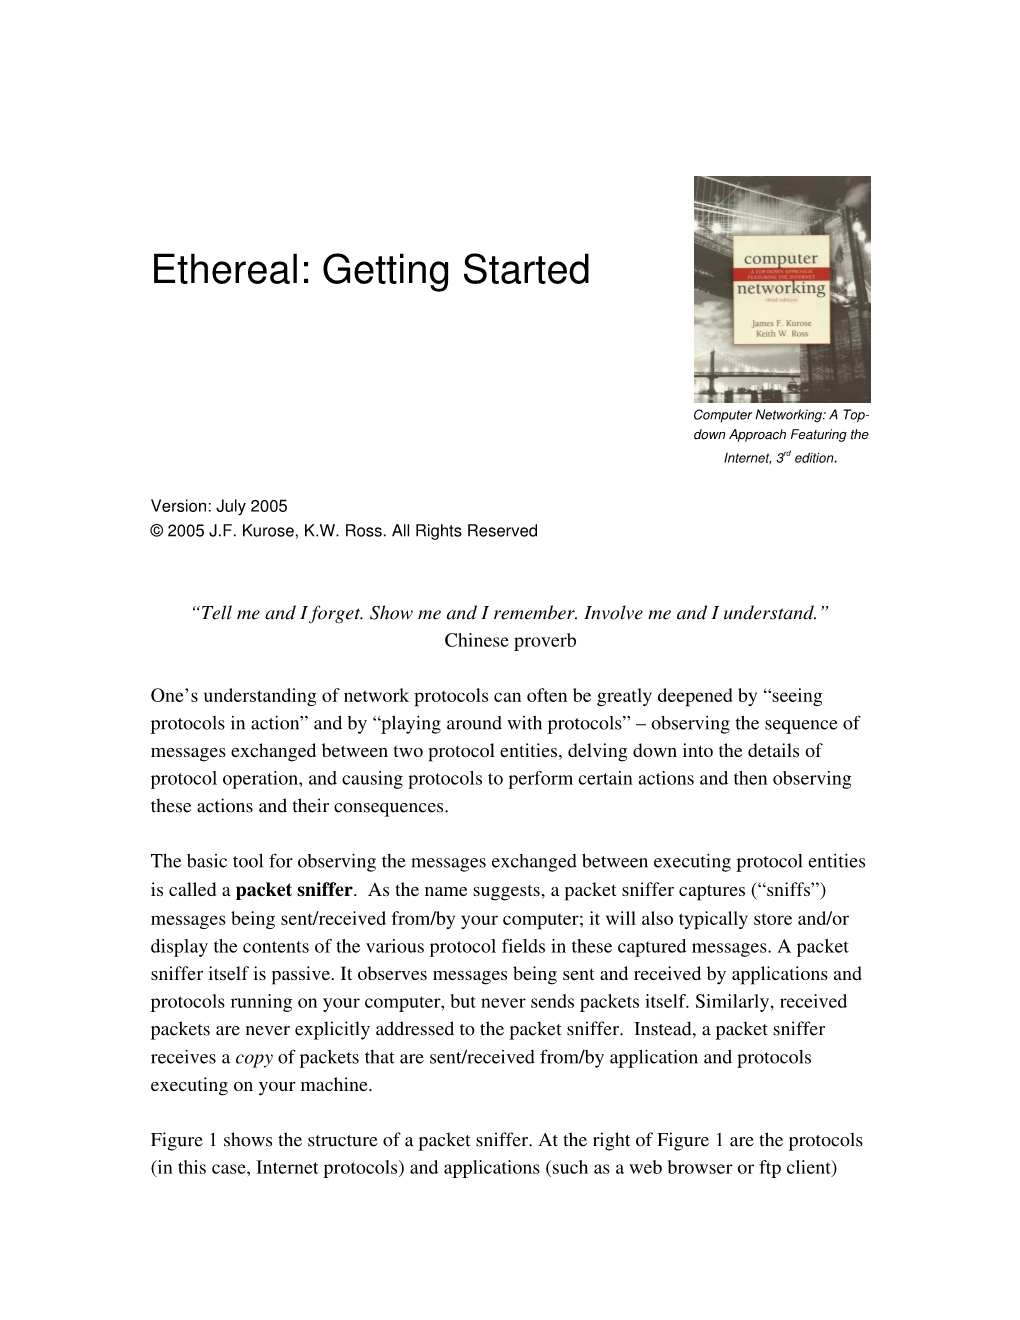 Getting Started with Ethereal